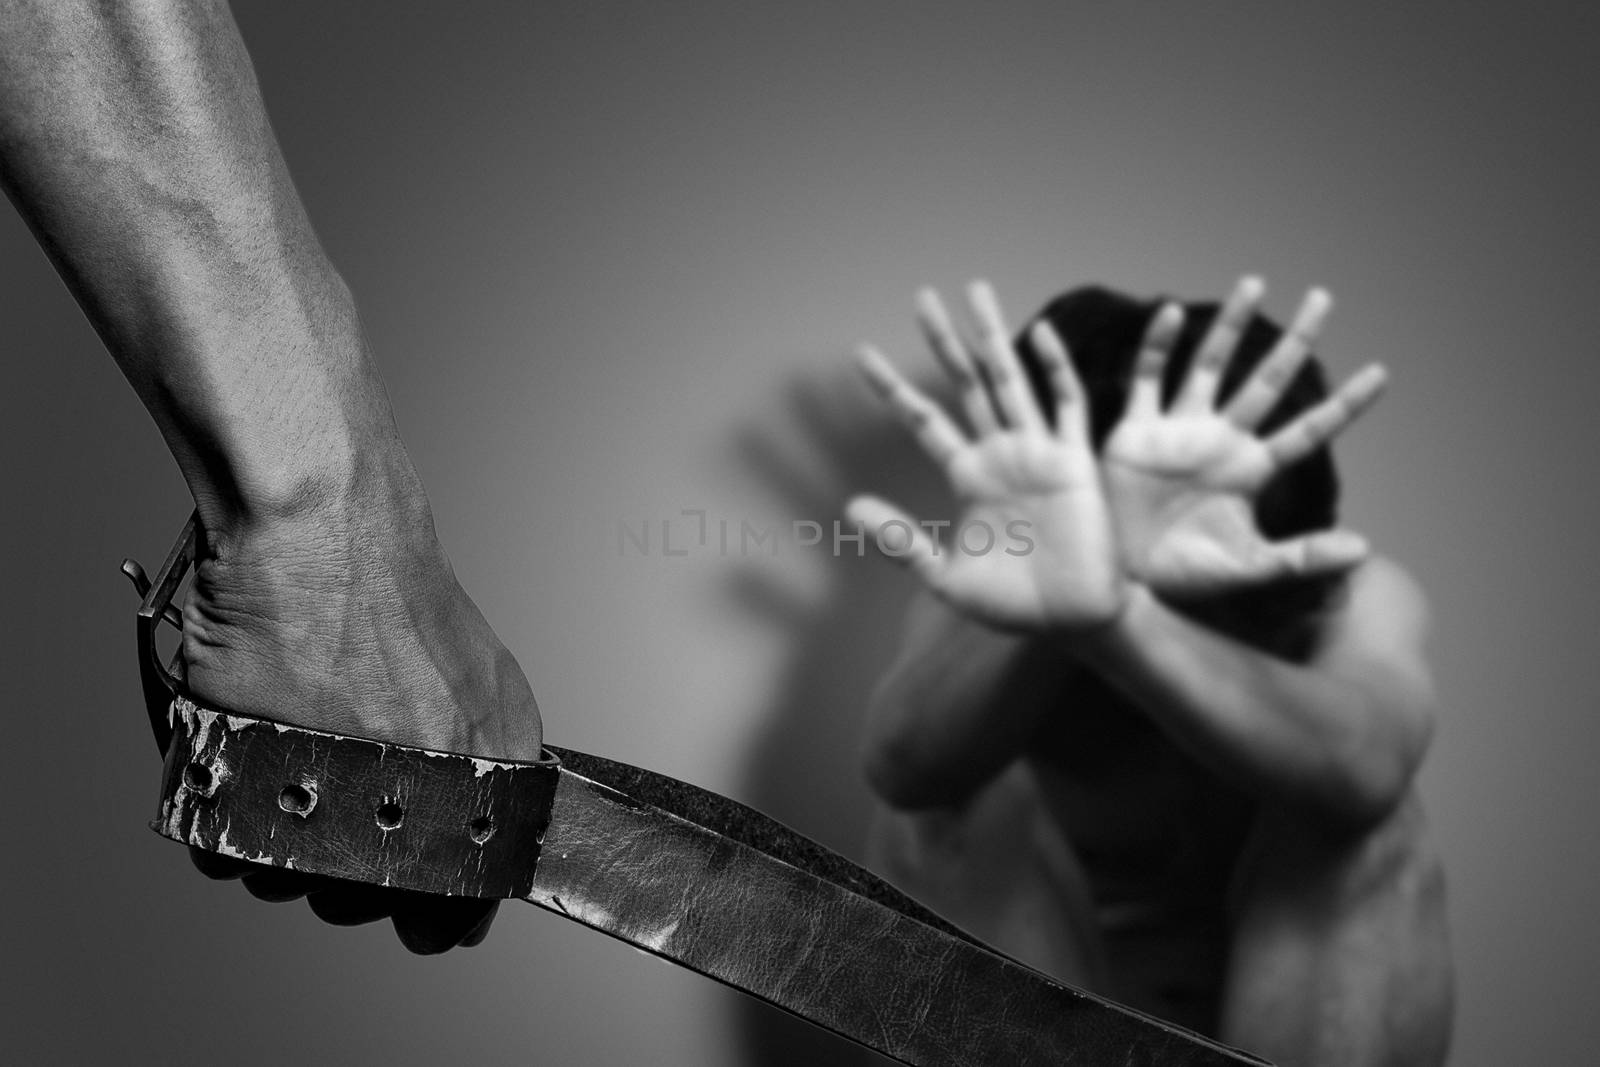 man use belts to hit and injure the others. campaign to stop using violence against others concept. by asiandelight